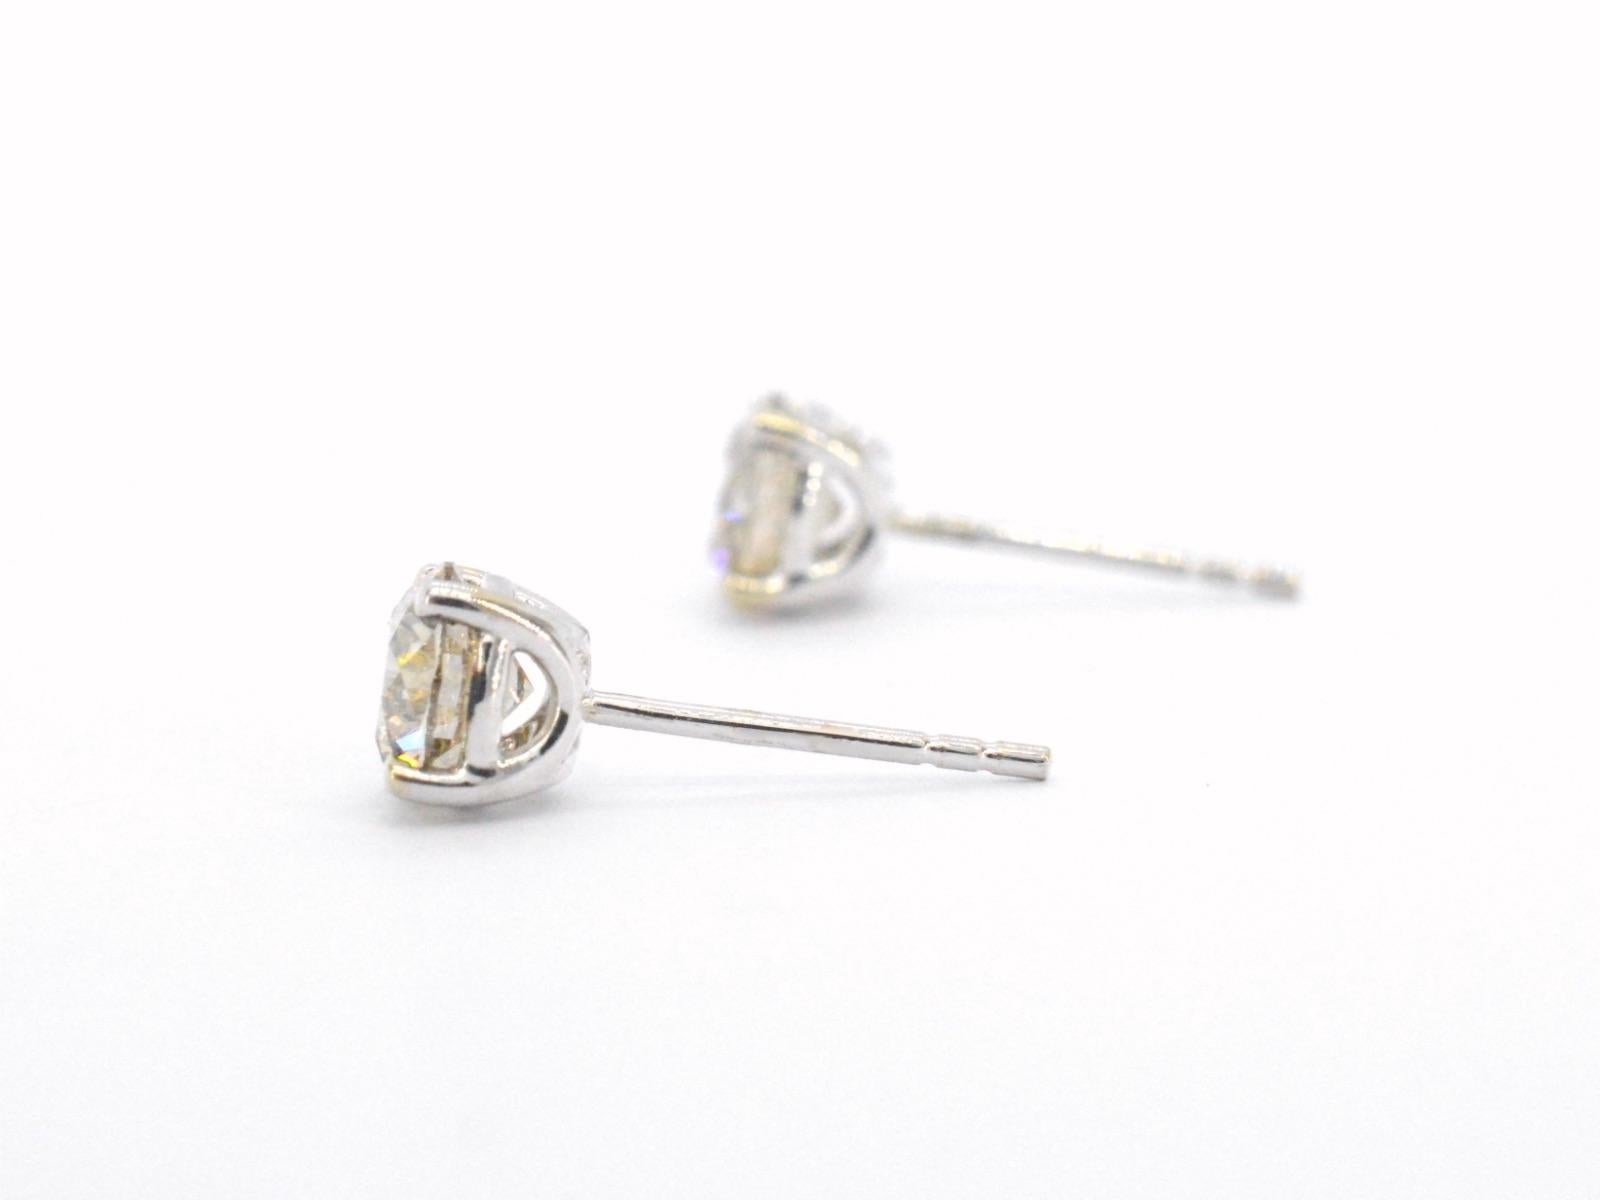 Brilliant Cut Gold Solitaire Earrings with Champagne Diamond